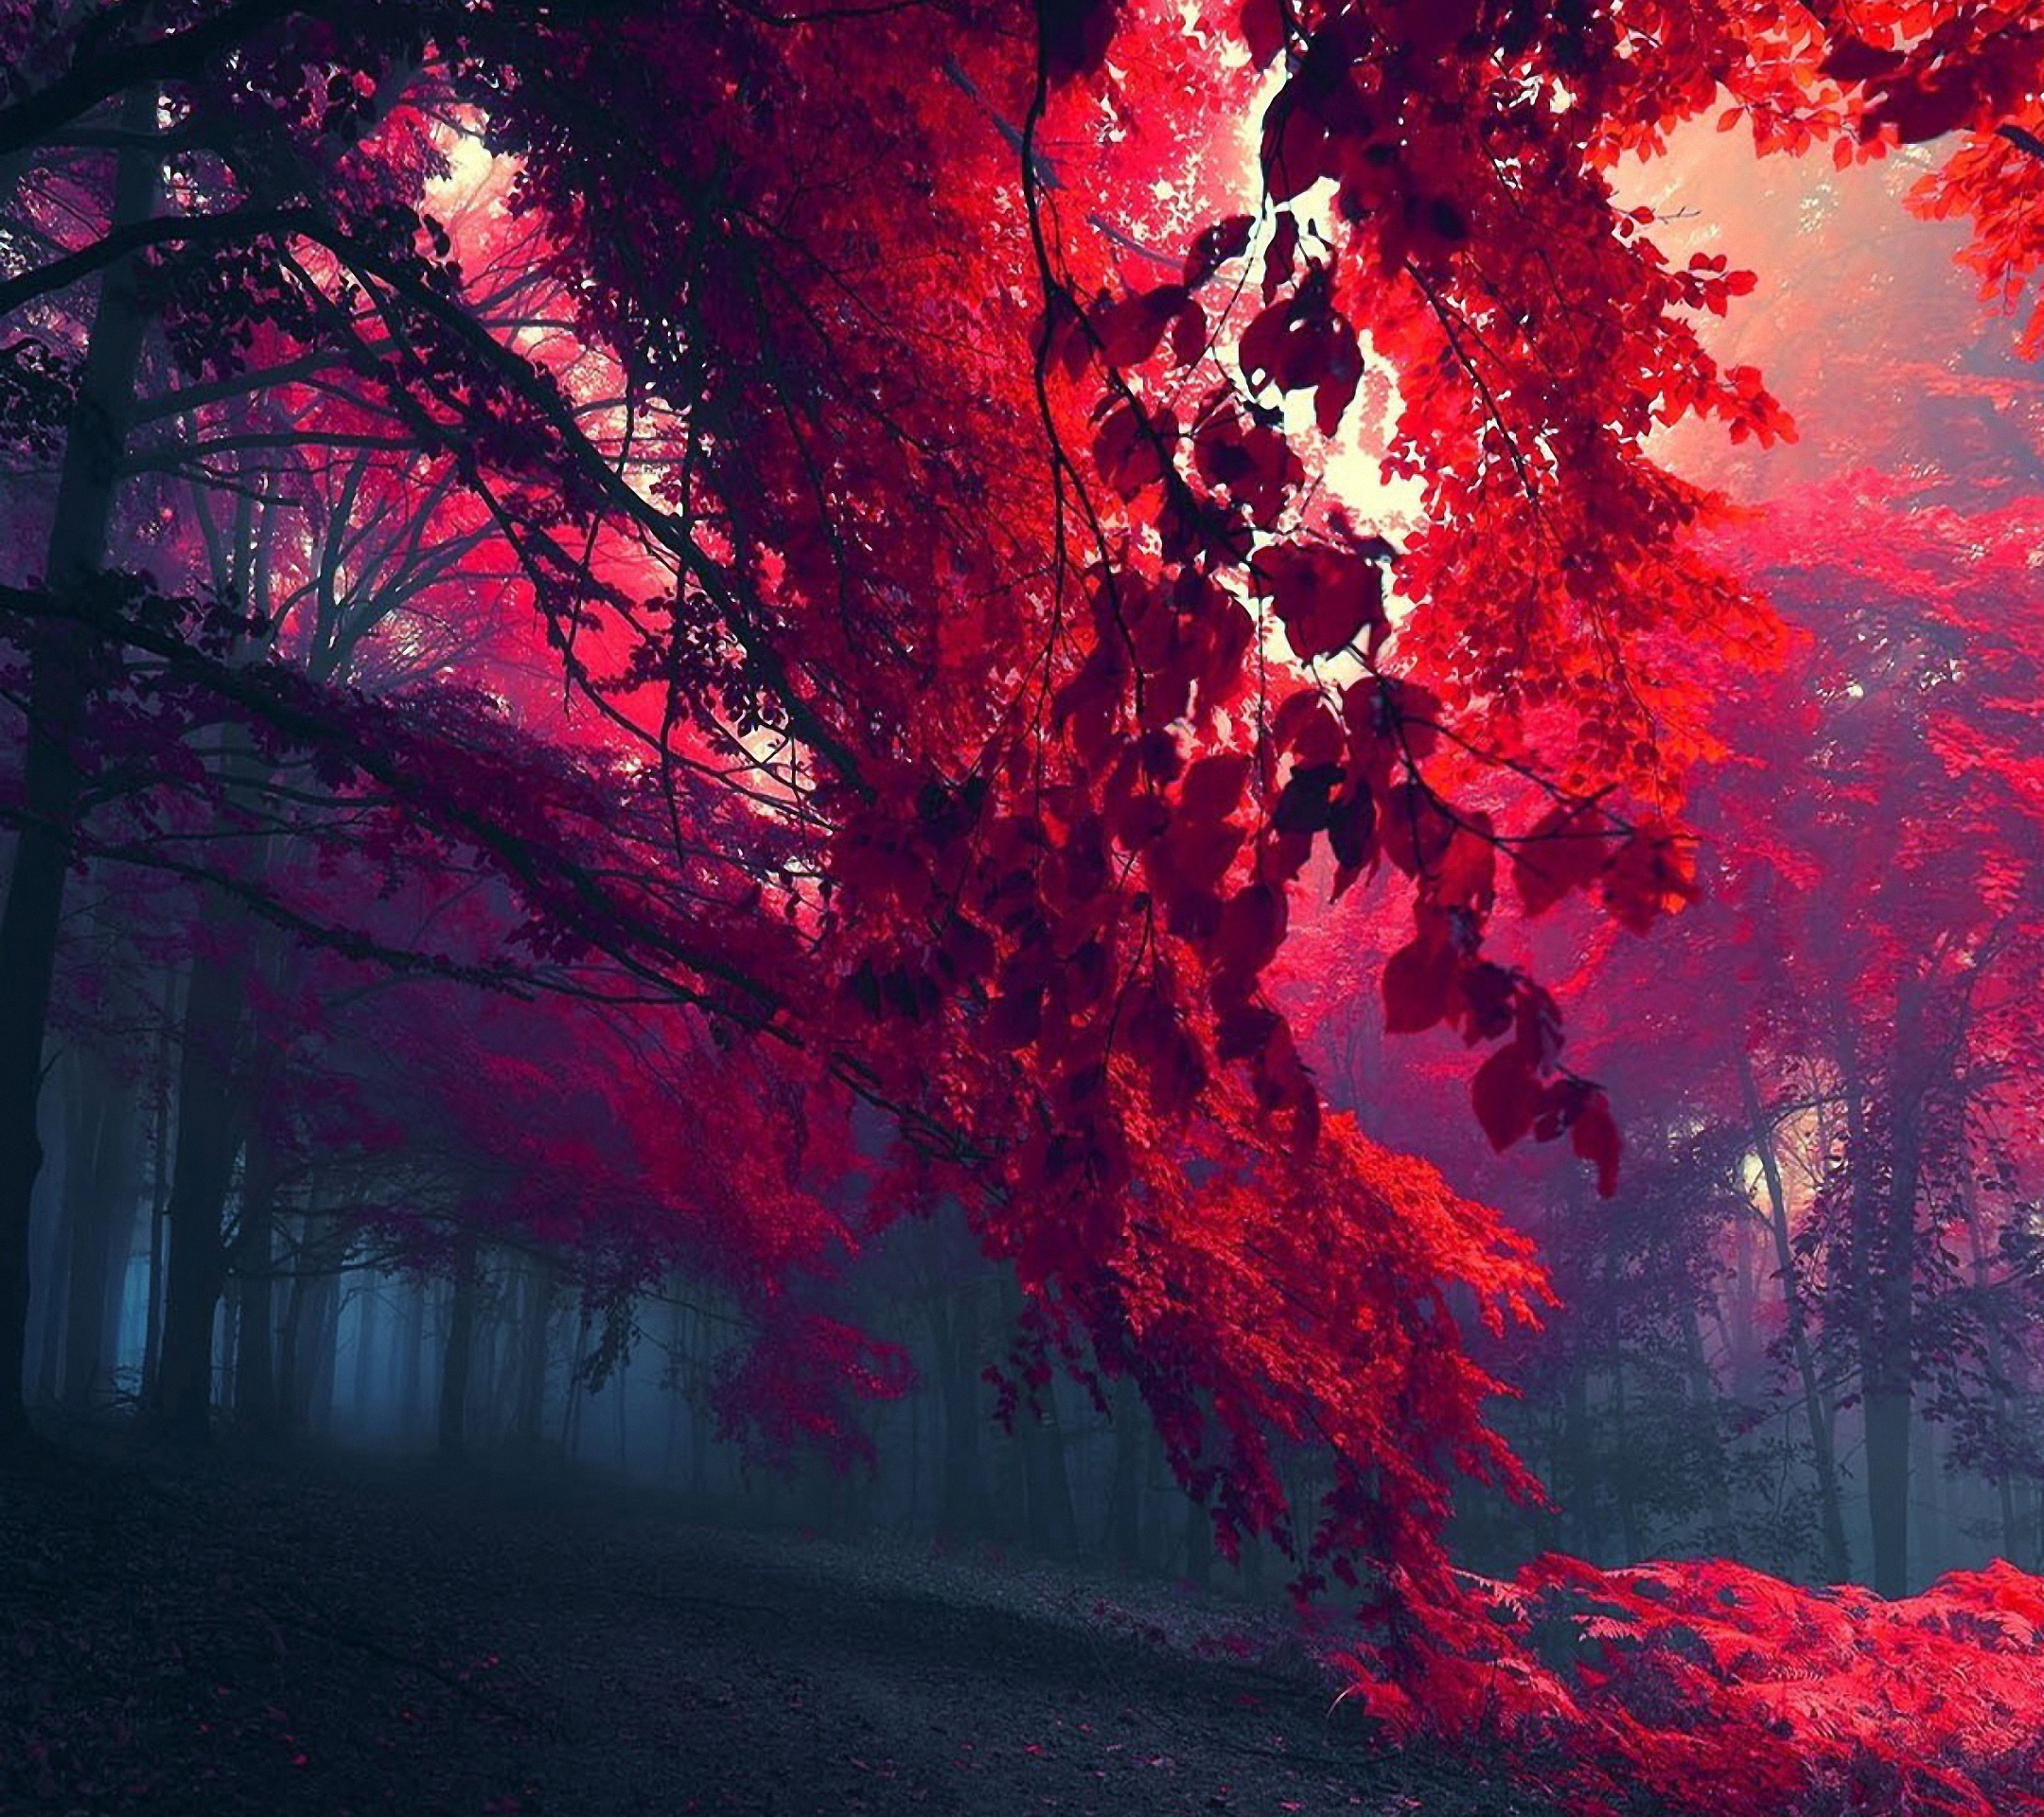 Hd Red Forest Sony Xperia Z Wallpapers - Ipad Air Wallpaper Red , HD Wallpaper & Backgrounds